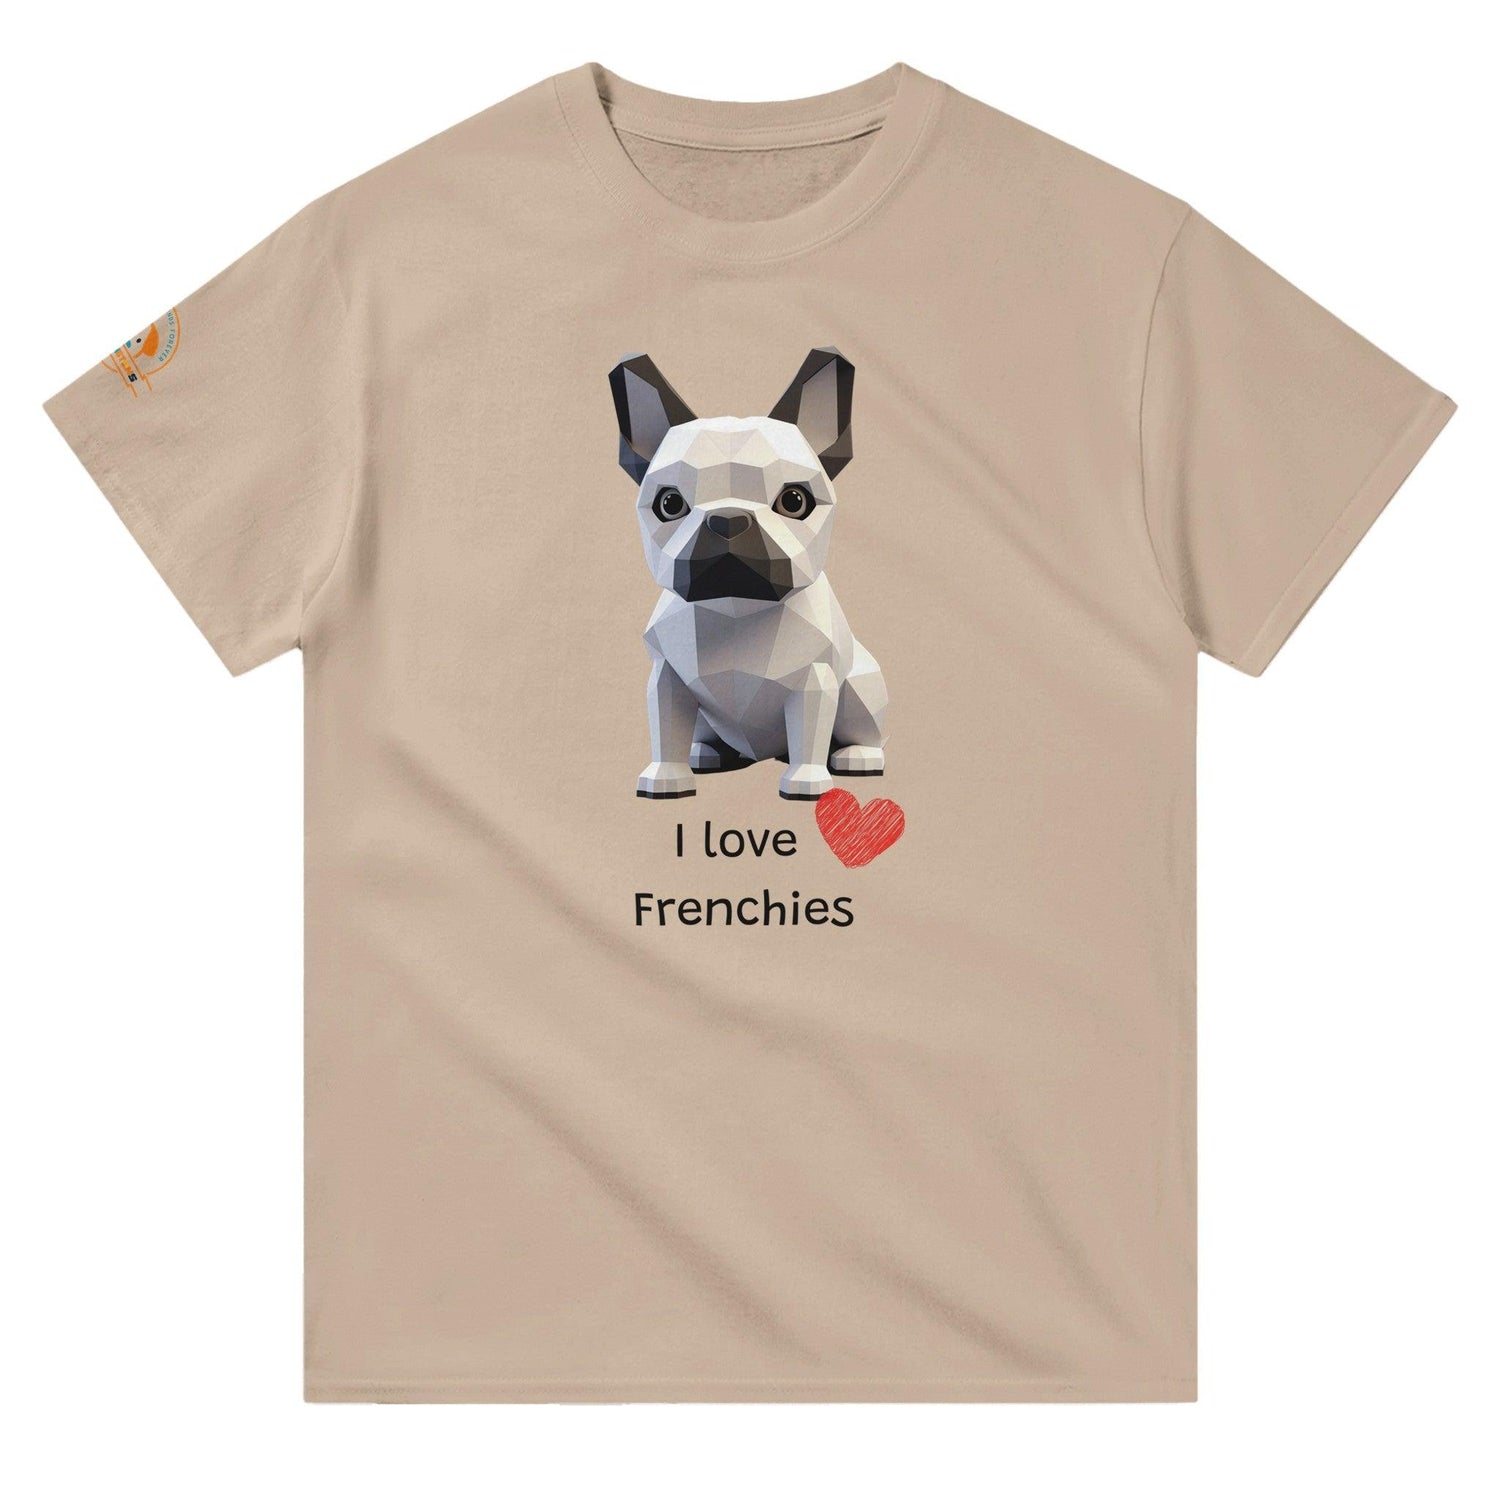 Polygon Pups: Frenchies - Geometric Dog Breed T-Shirt - Woofingtons